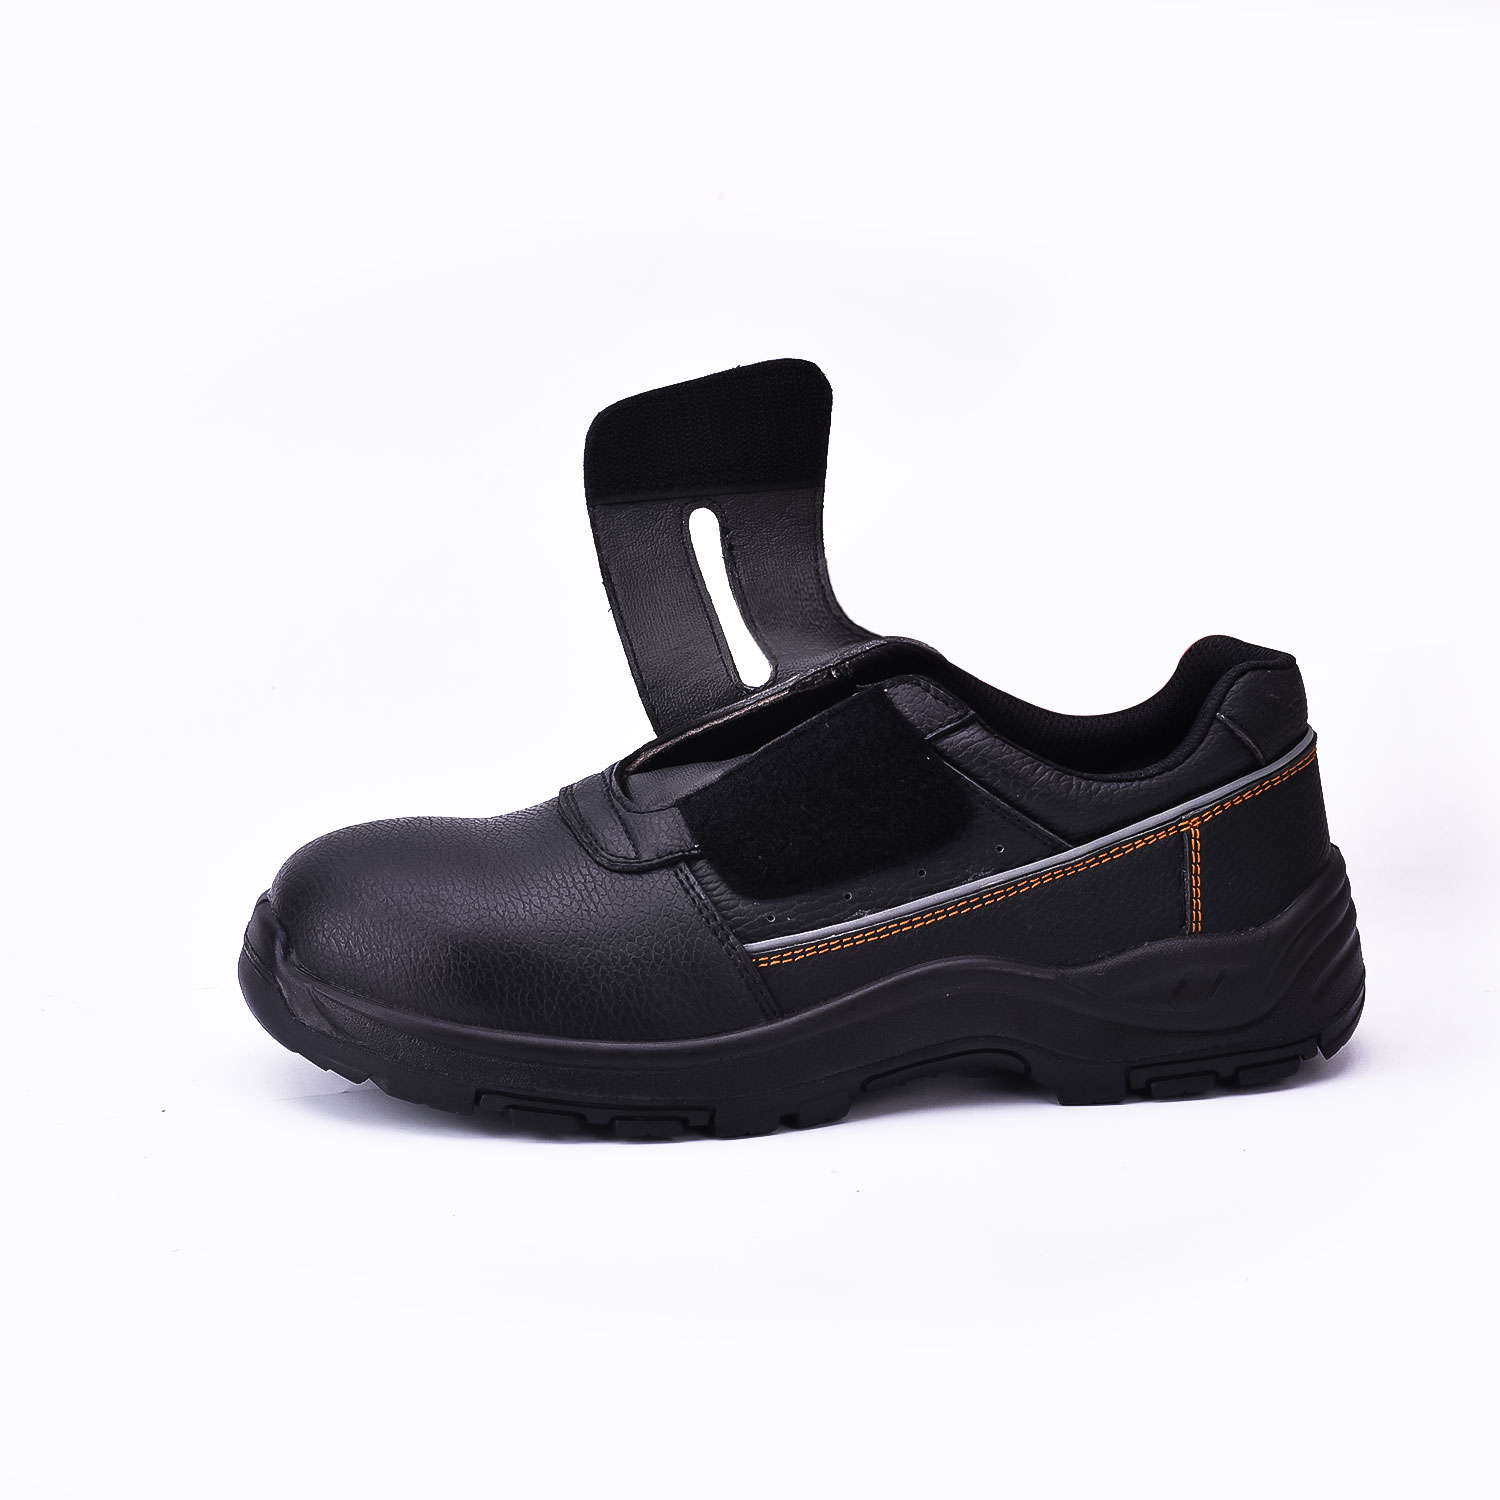 Whosale Welding Safety Shoes L-7395